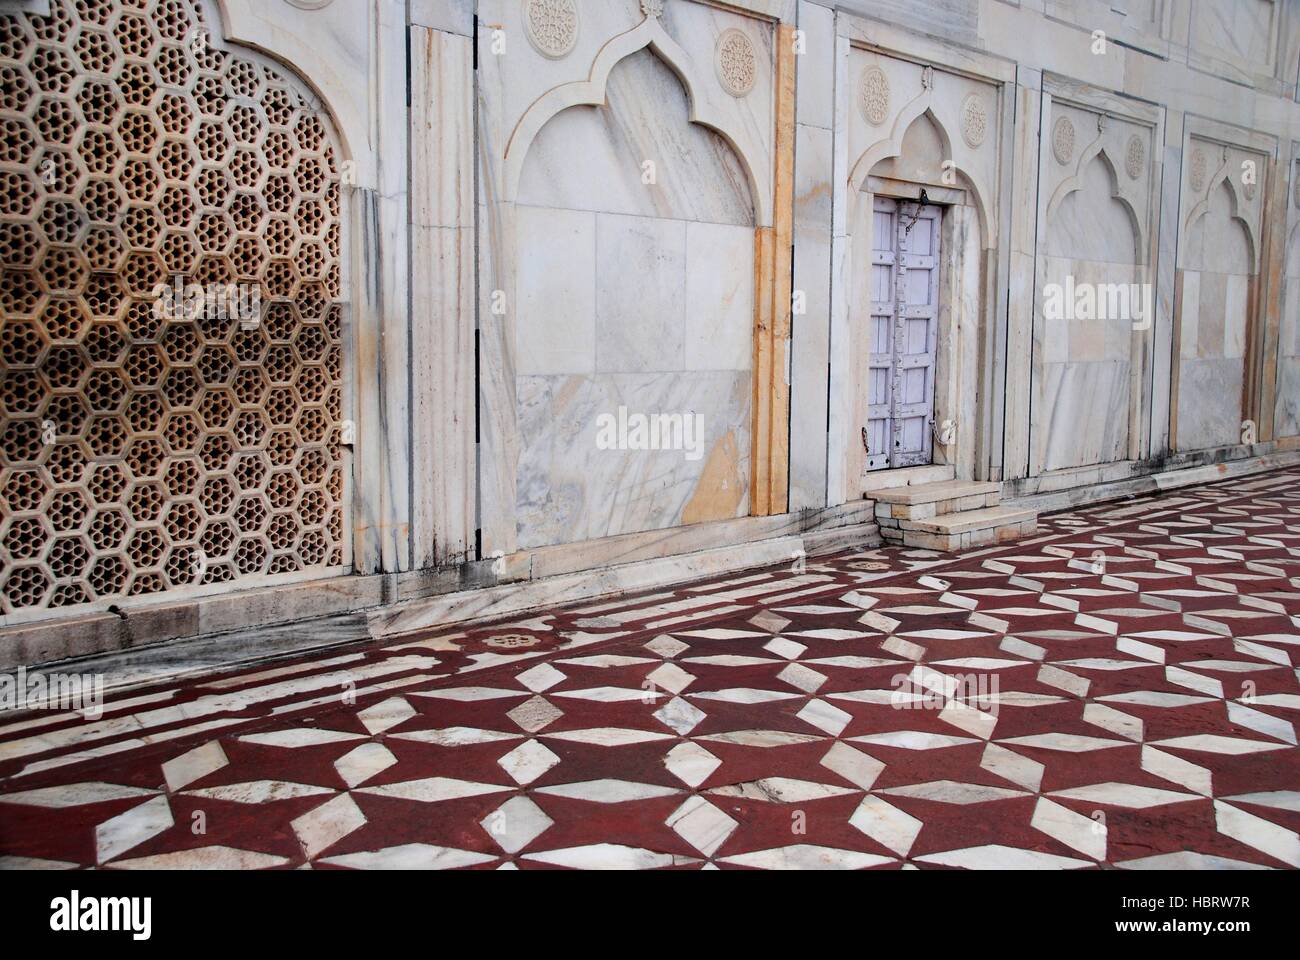 Taj Mahal intricate wall and floor designs with a mixture of Indian, Persian, Islamic and Turkish origin Stock Photo